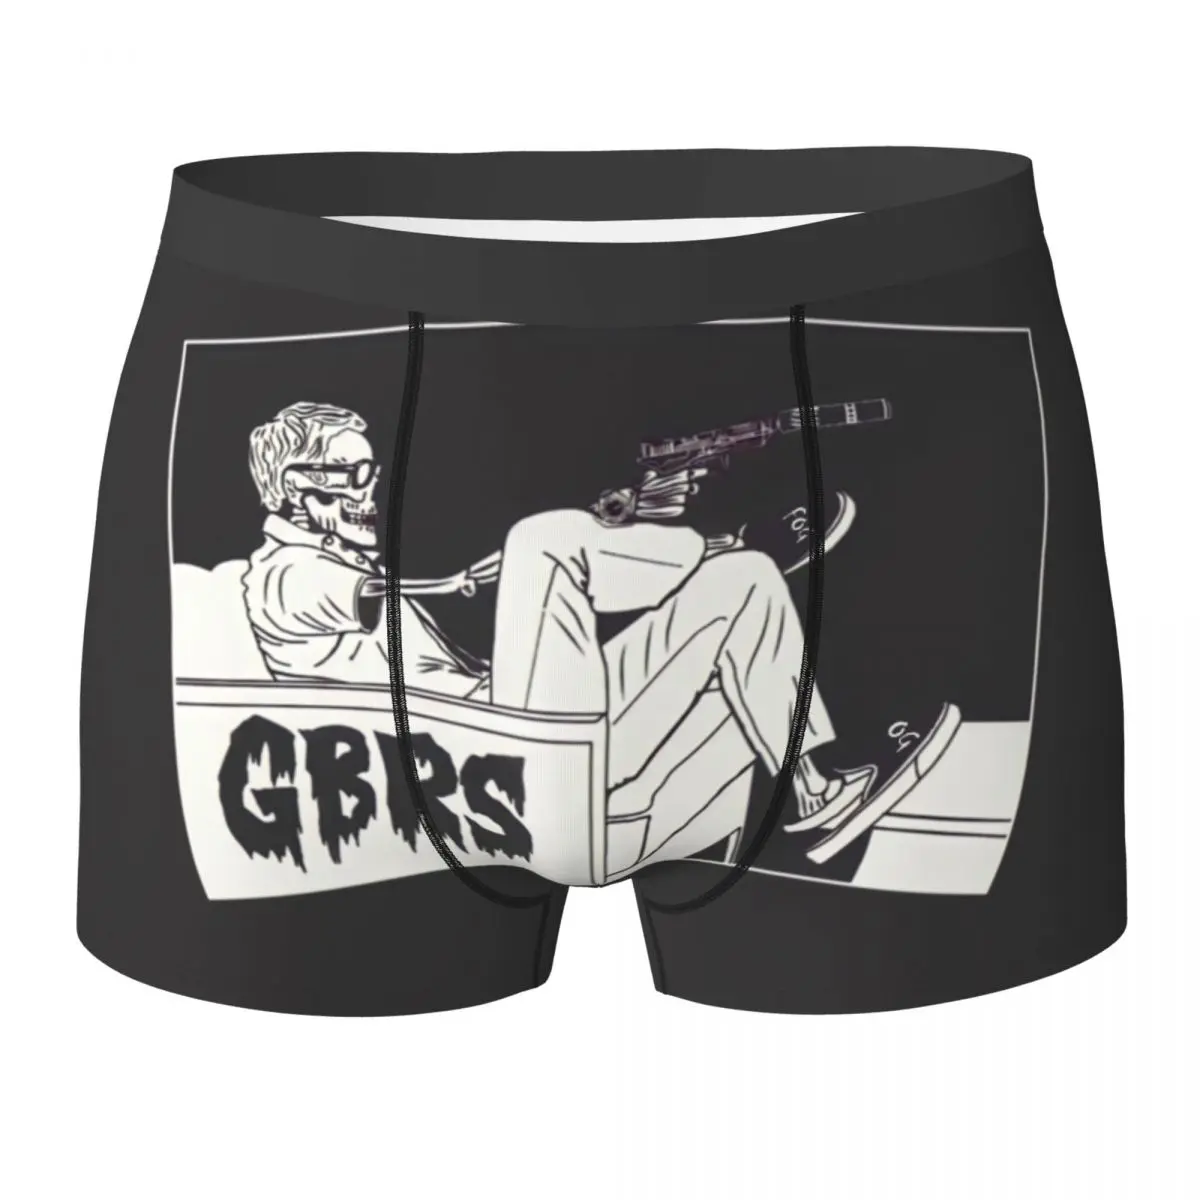 

Forward Observations Group Gbrs Men's Underwear Boxer Briefs Shorts Panties Hot Breathable Underpants for Male S-XXL